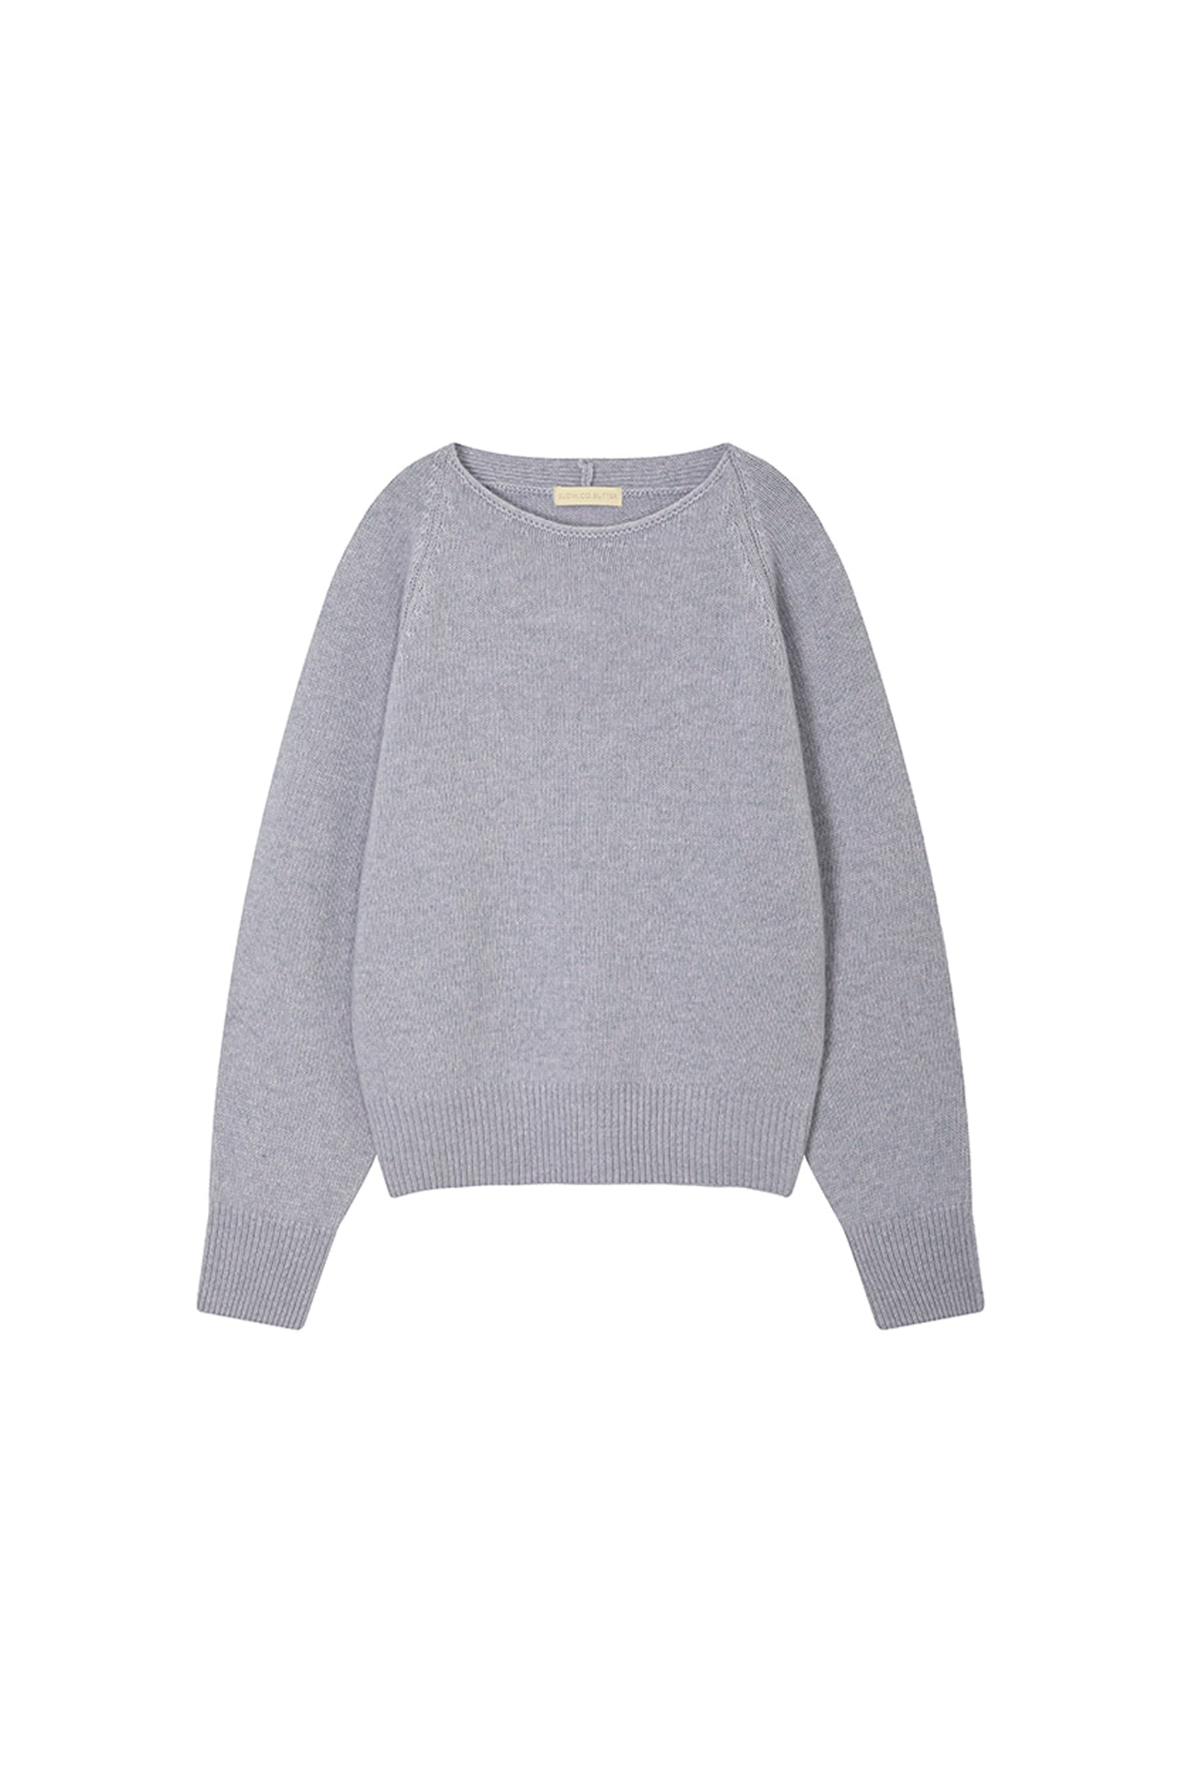 [SLOCO] Silhouette cashmere knit, blueberry